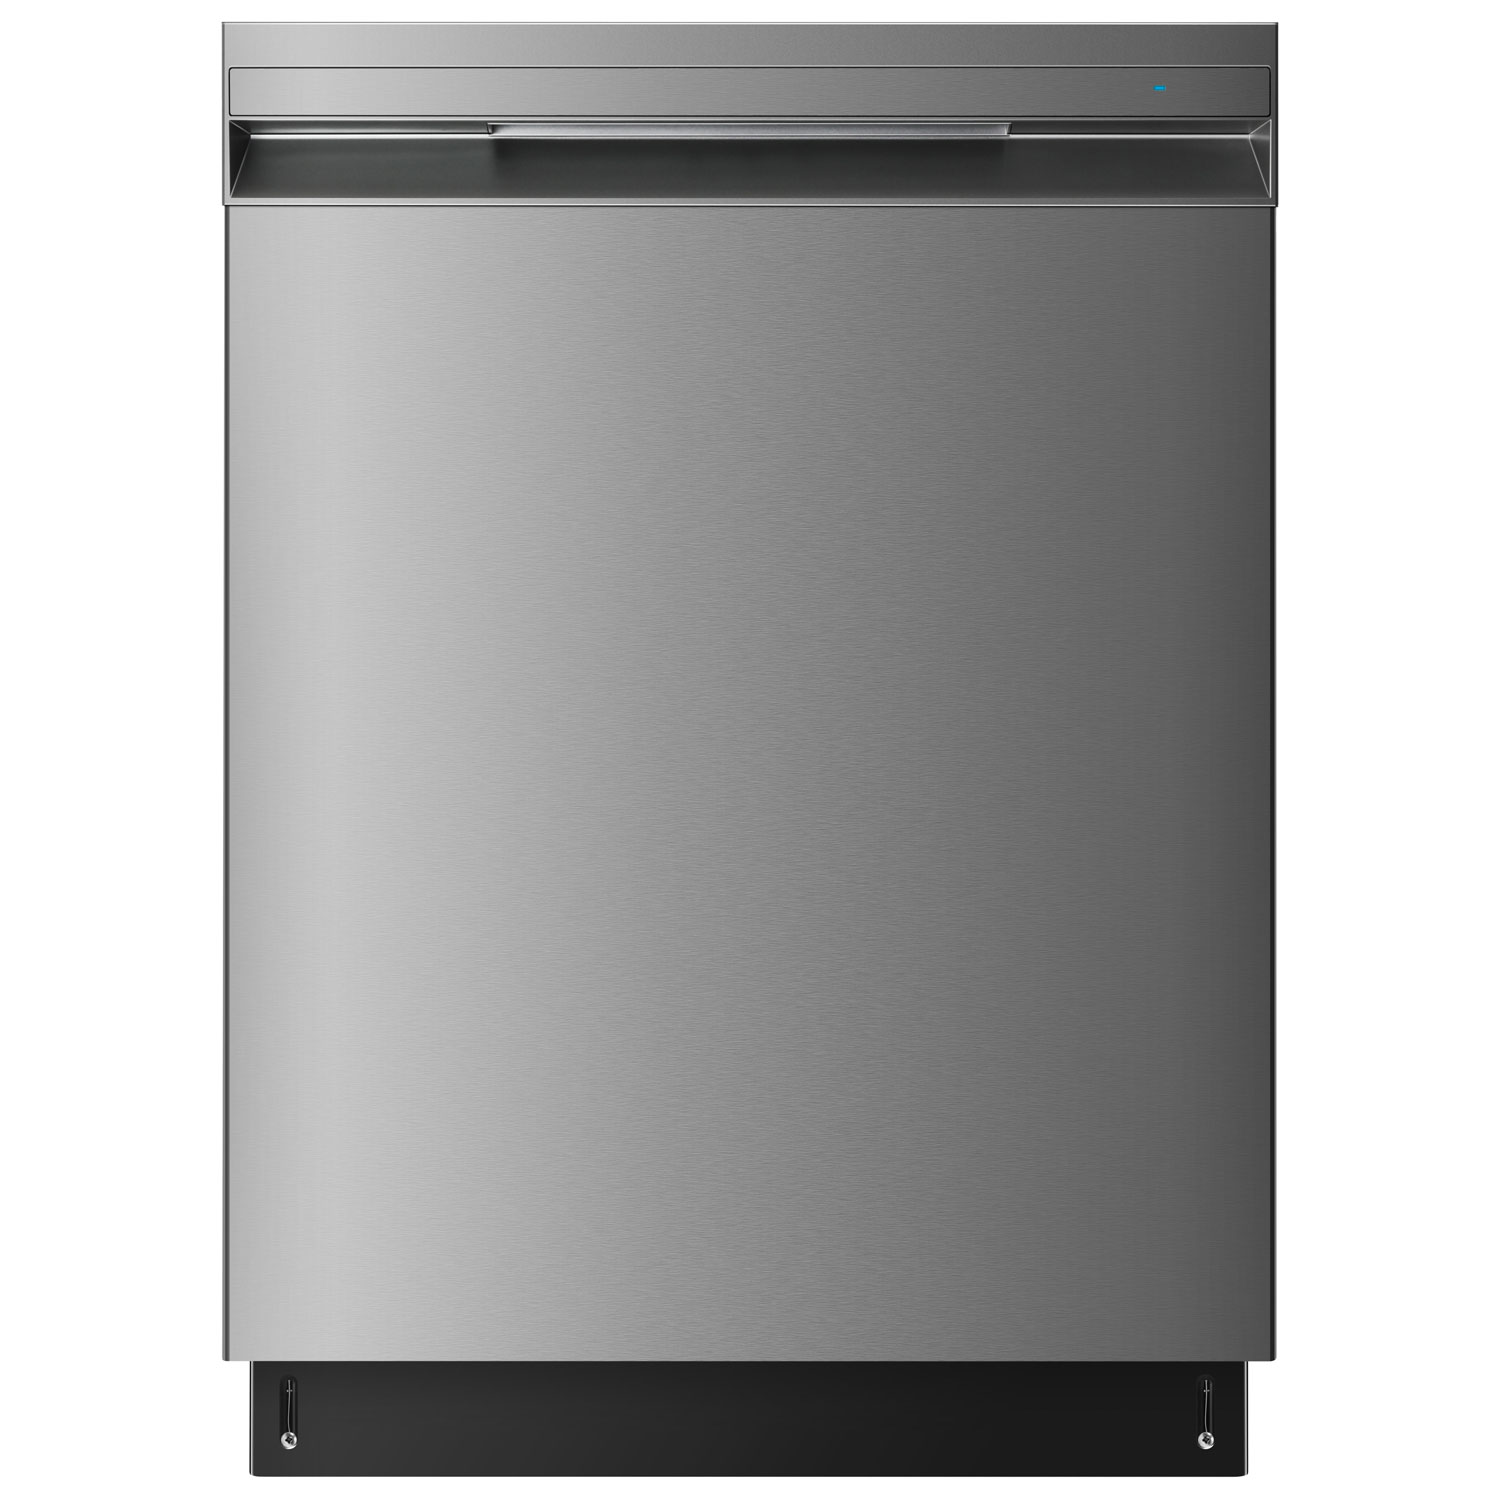 Insignia 24" 49dB Built-In Dishwasher with Third Rack (NS-DWR3SS1) - Stainless Steel